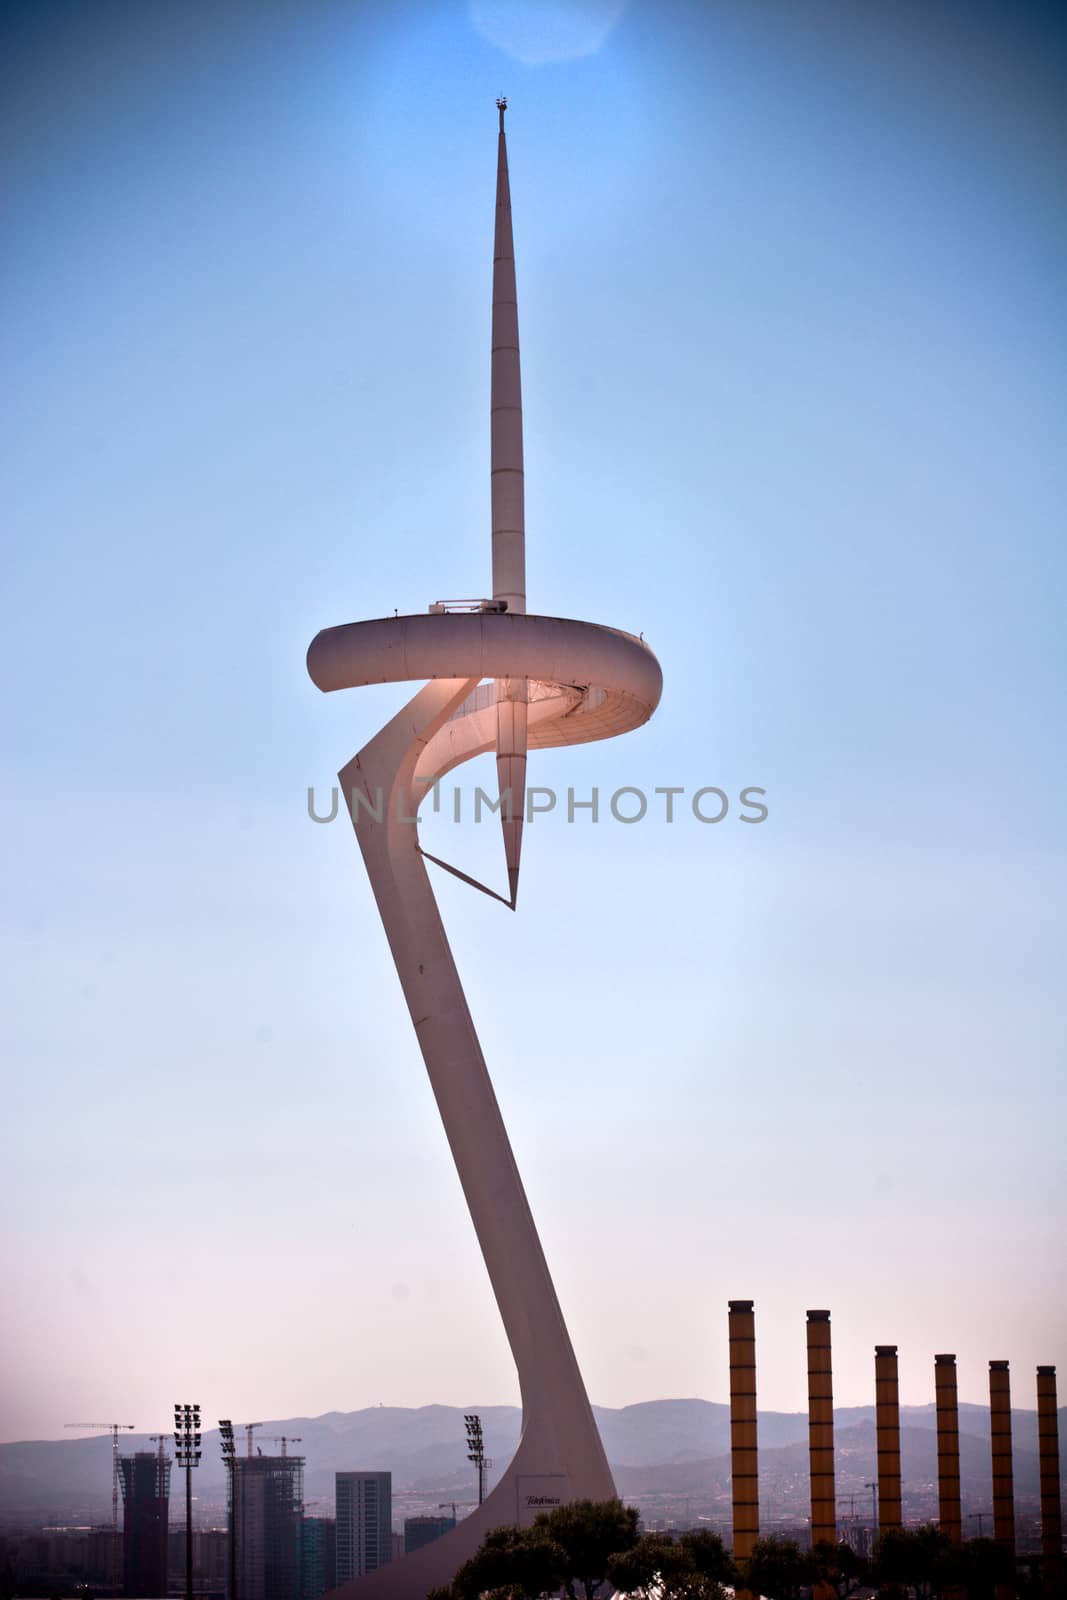 The beautiful Montjuic communications tower in Barcelona Spain is symbolic of an Olympic athlete carrying a torch